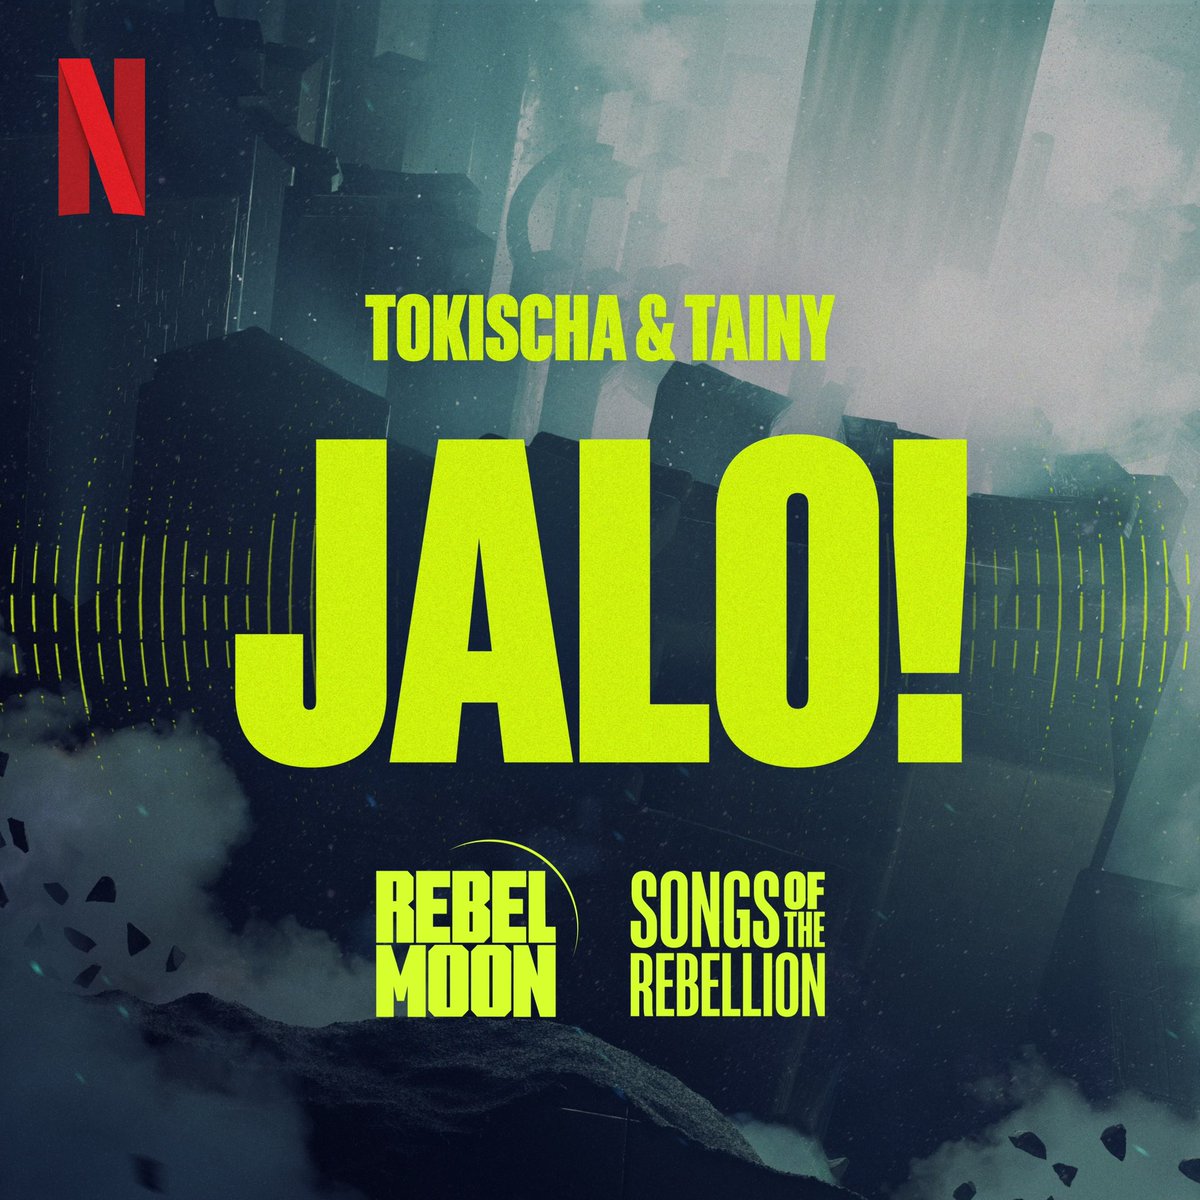 JALO! by @tokischa_ & @Tainy is the first single of our “Inspired by” EP and the track is OUT NOW! ¡Escúchala ya! netflixmusic.ffm.to/jalo